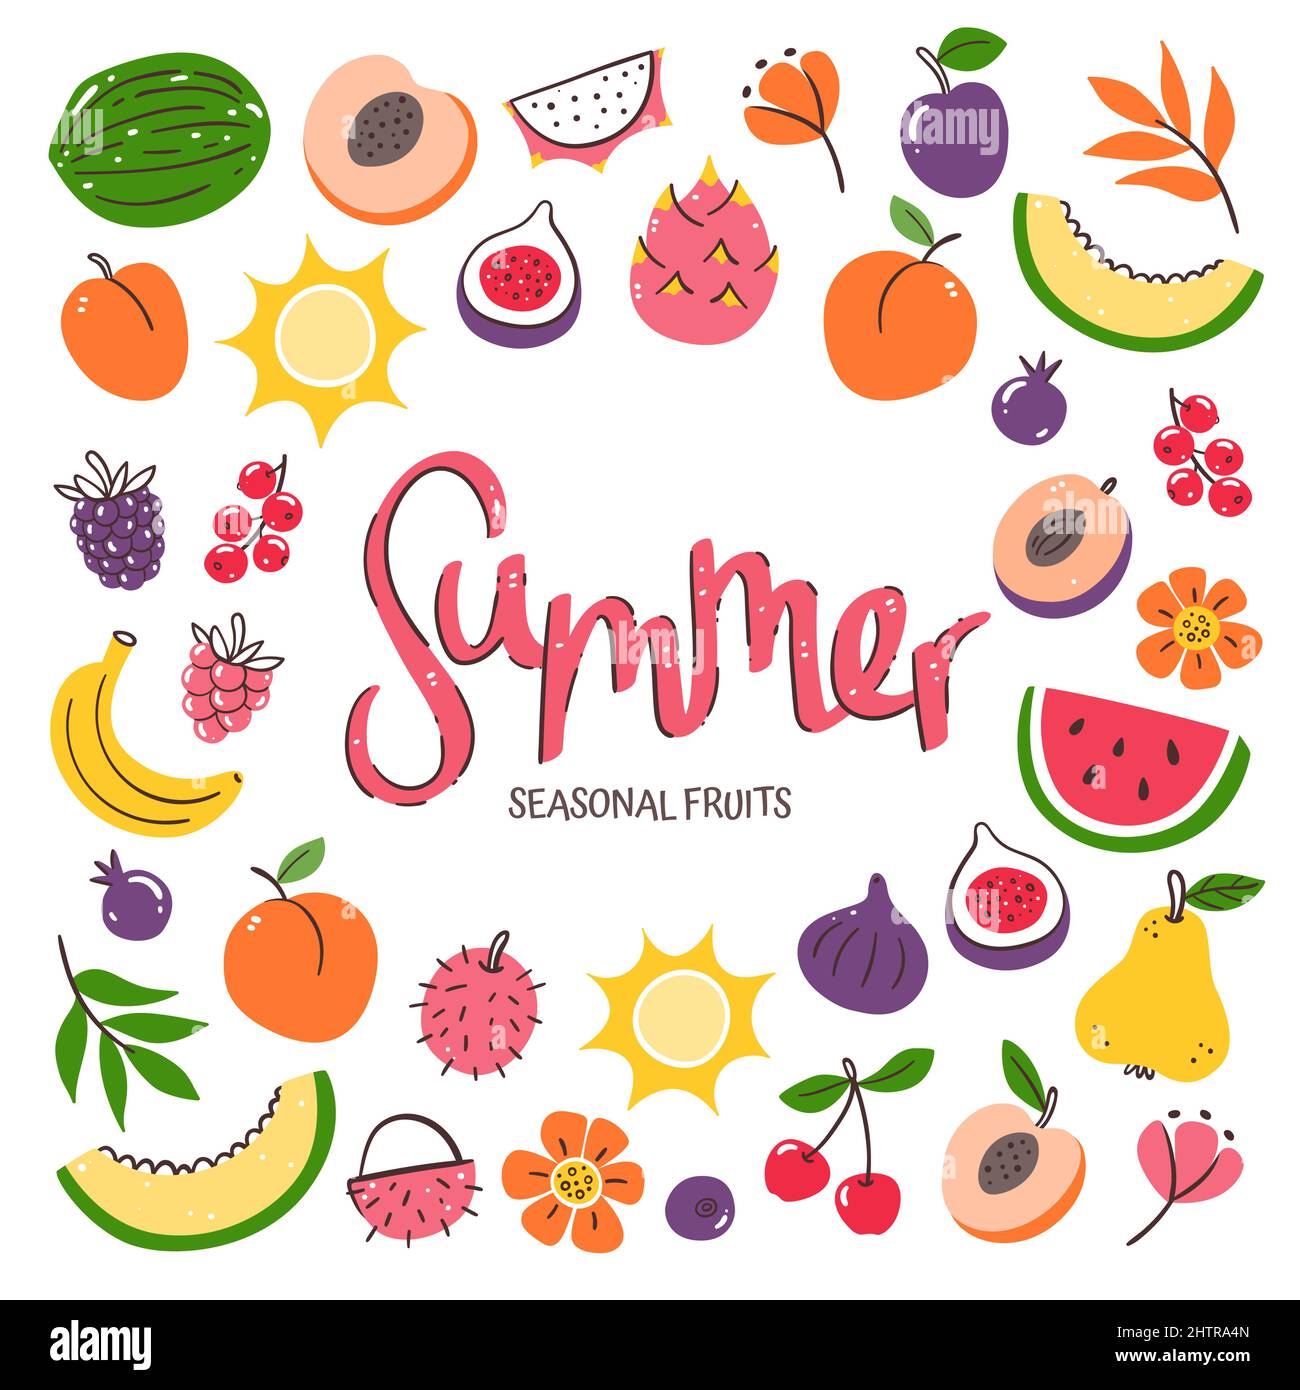 Seasonal fruits background. Summer fruit composition made of colorful hand-drawn vector icons, isolated on white background. Stock Vector